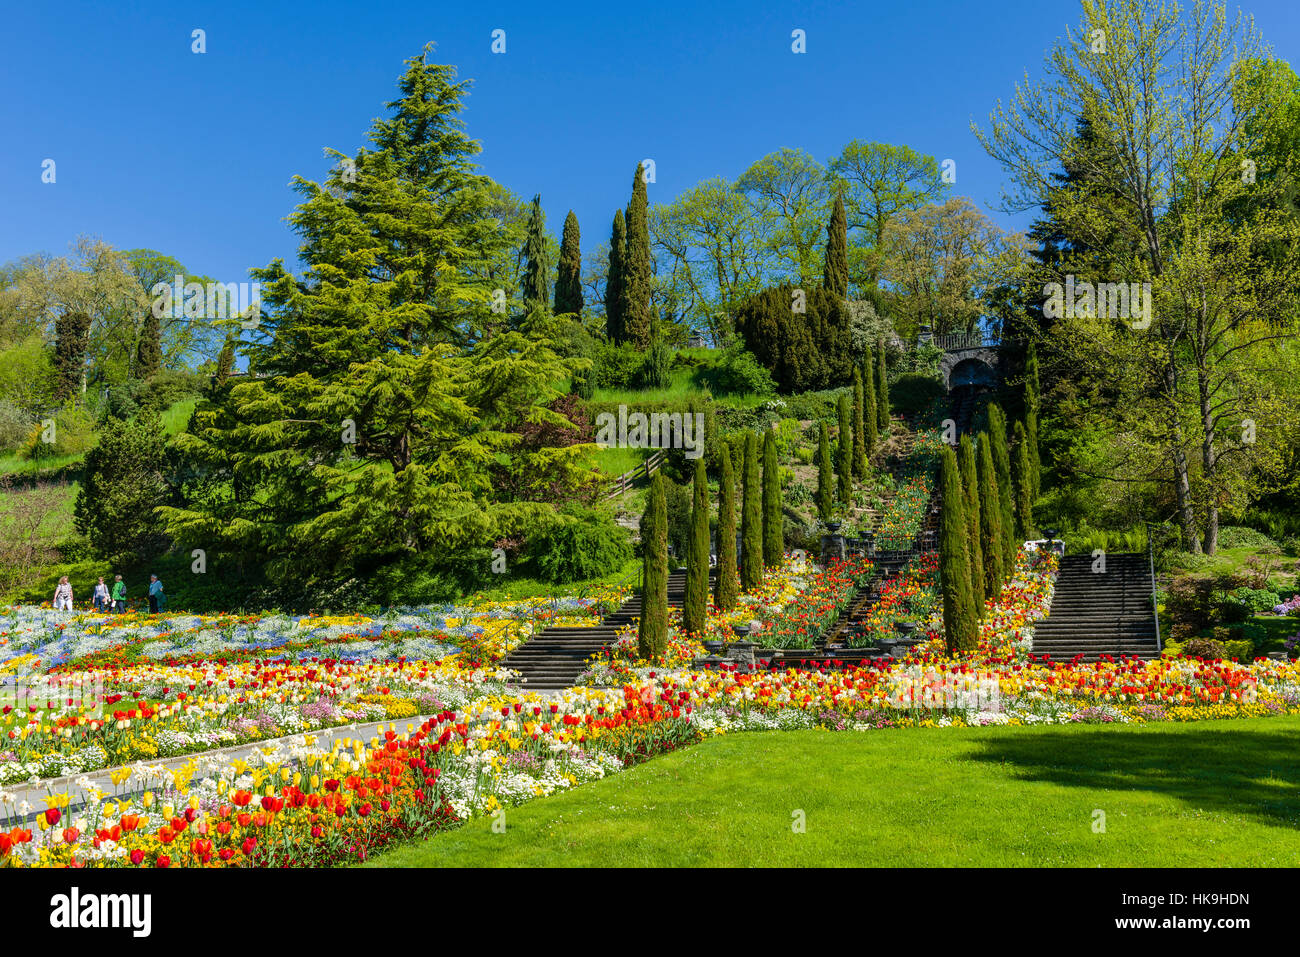 Landscape gardening and blooming flowers at Island Mainau, the 'Island of flowers' at Lake Constance Stock Photo